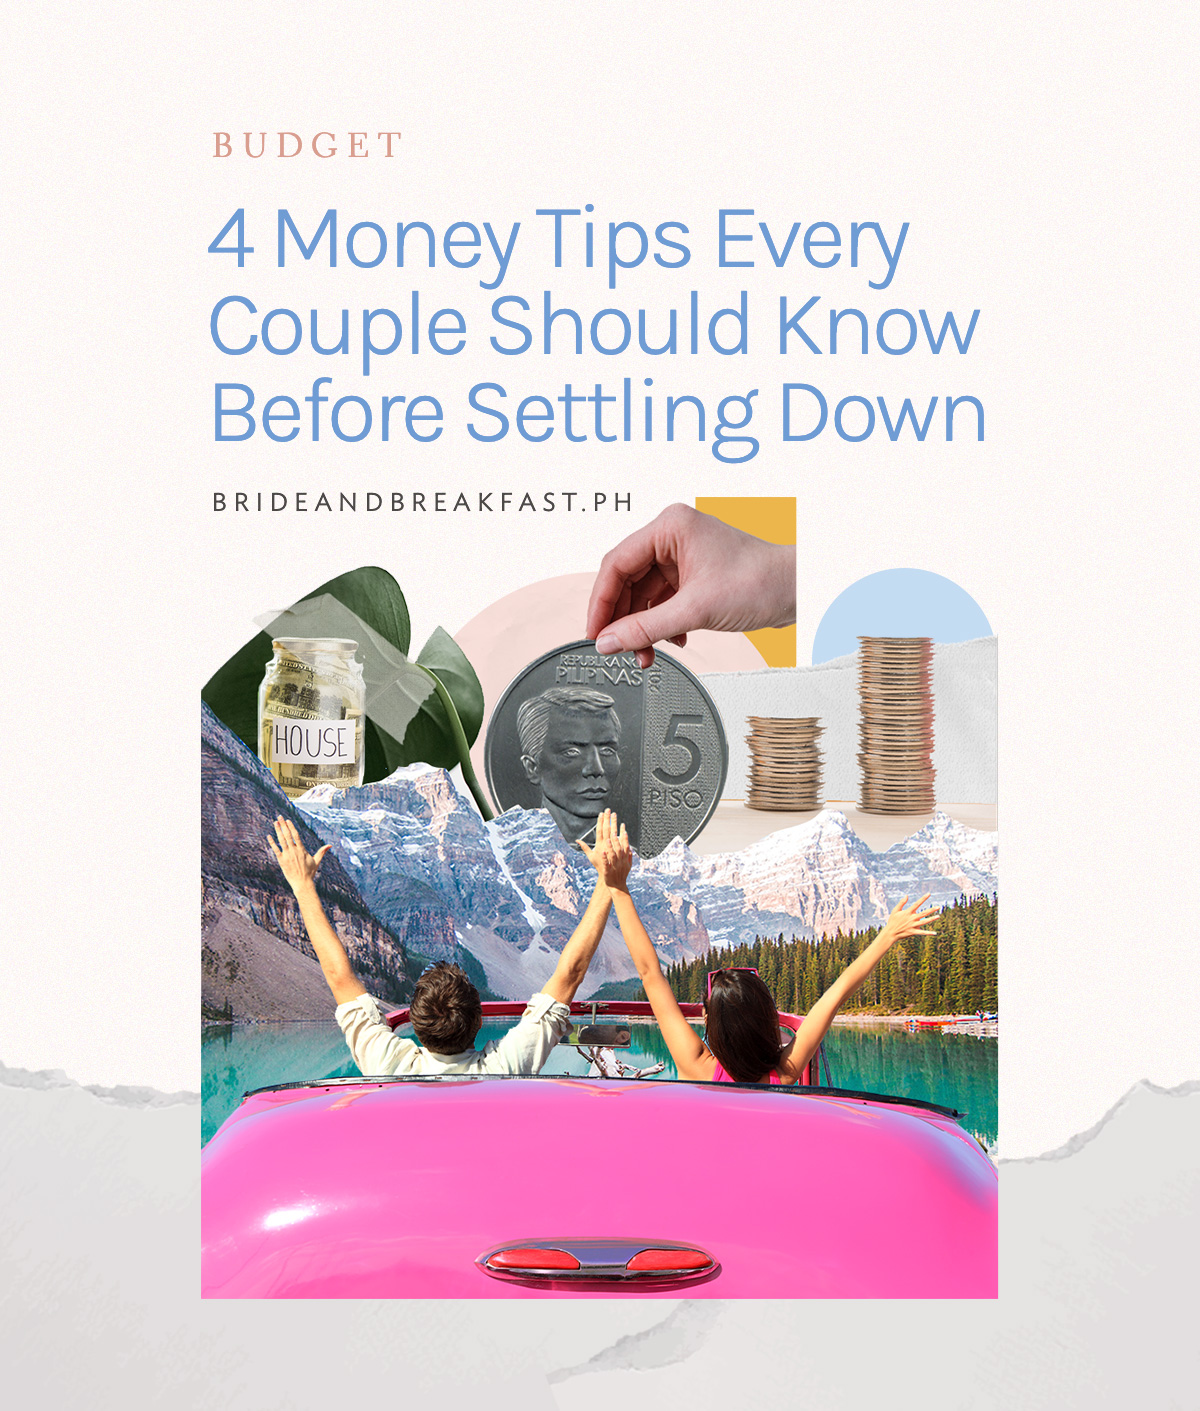 4 Money Tips Every Couple Should Know Before Settling Down